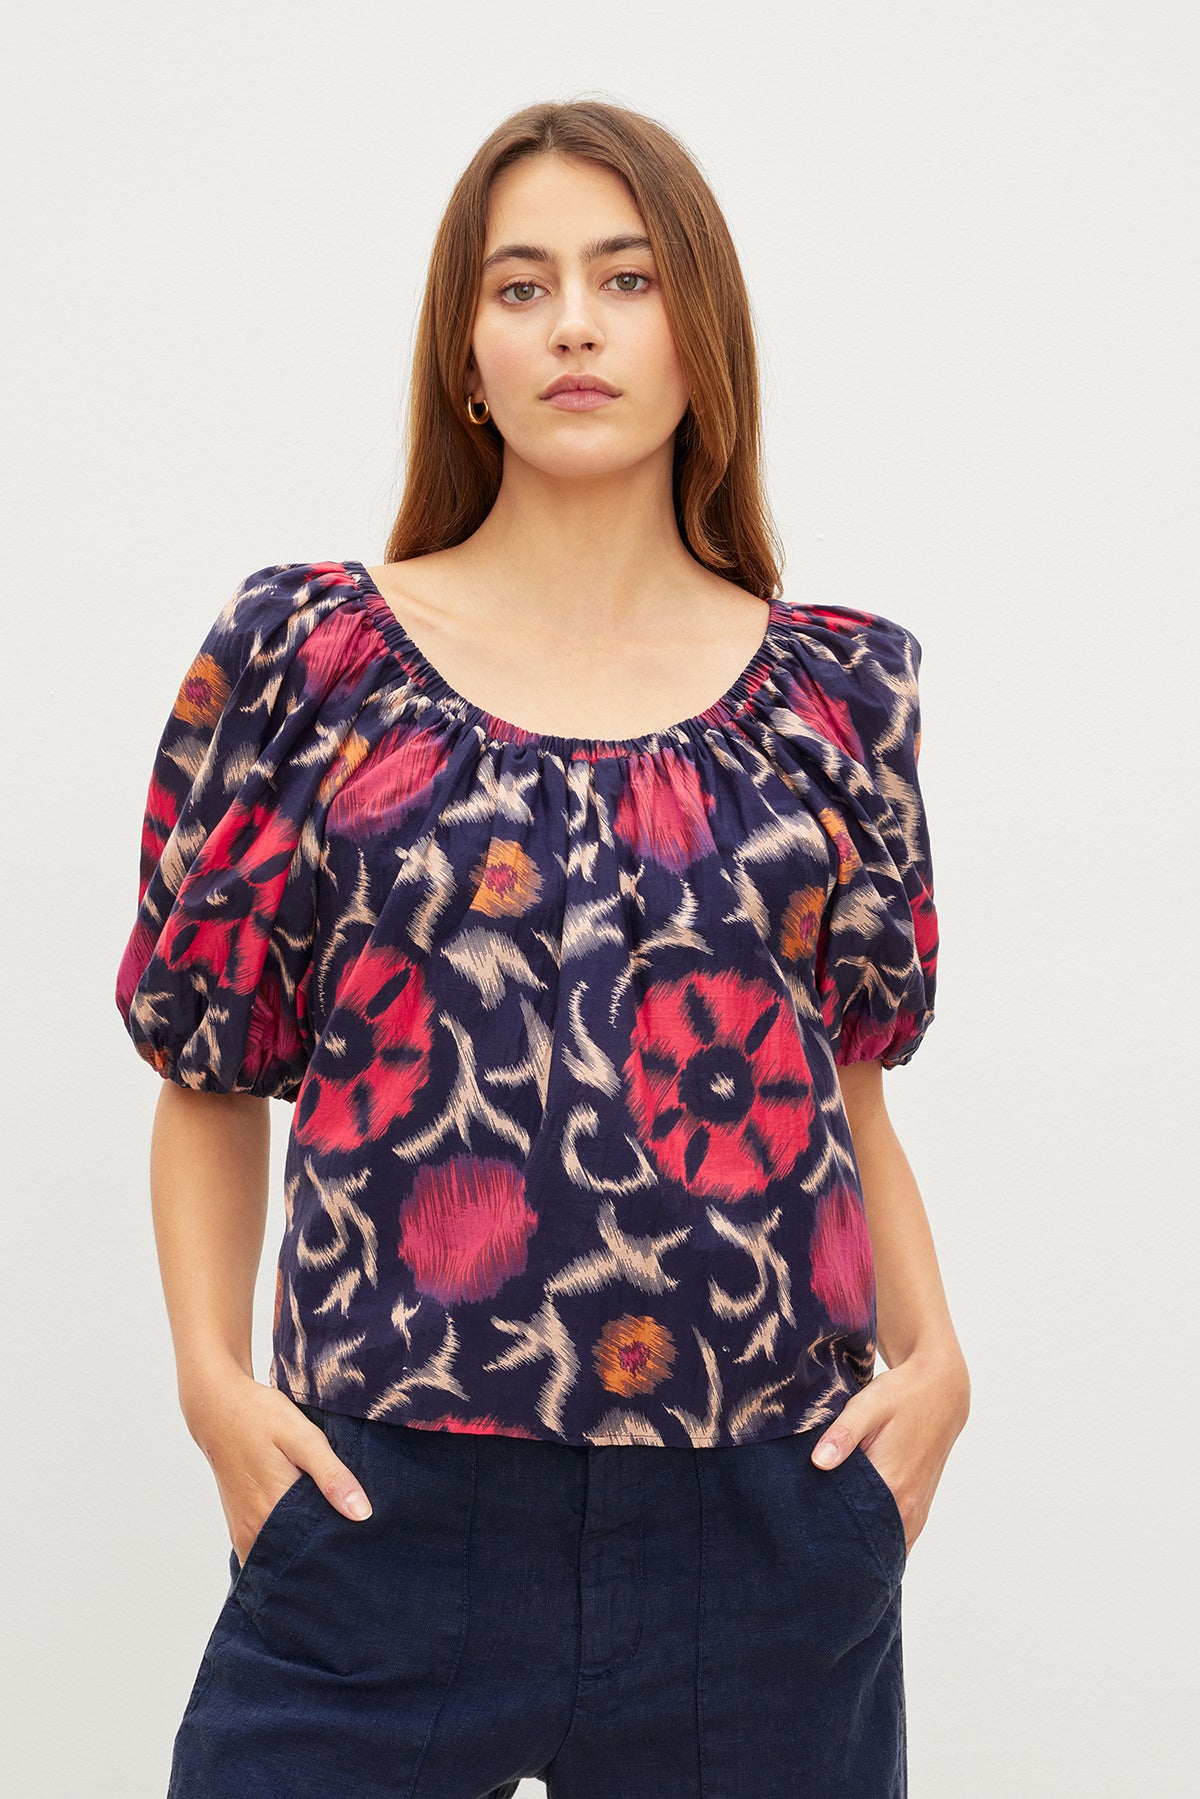   The model is wearing a Velvet by Graham & Spencer EDLIN PRINTED SILK COTTON VOILE TOP with a floral print. 